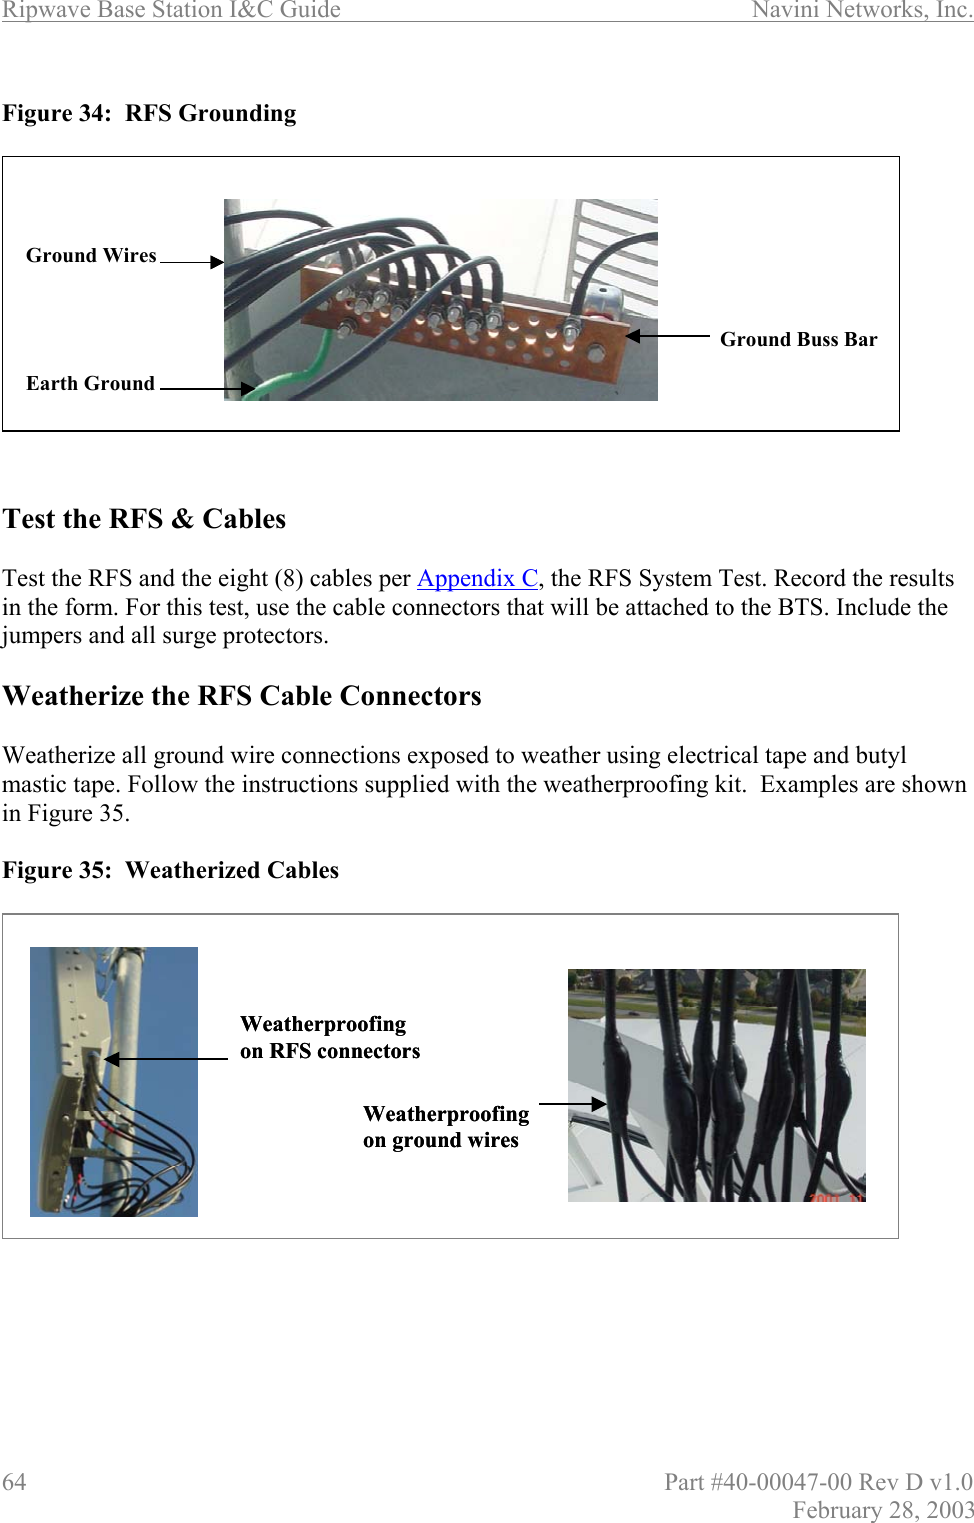 Ripwave Base Station I&amp;C Guide                      Navini Networks, Inc. 64                          Part #40-00047-00 Rev D v1.0 February 28, 2003  Figure 34:  RFS Grounding              Test the RFS &amp; Cables  Test the RFS and the eight (8) cables per Appendix C, the RFS System Test. Record the results in the form. For this test, use the cable connectors that will be attached to the BTS. Include the jumpers and all surge protectors.  Weatherize the RFS Cable Connectors  Weatherize all ground wire connections exposed to weather using electrical tape and butyl mastic tape. Follow the instructions supplied with the weatherproofing kit.  Examples are shown in Figure 35.  Figure 35:  Weatherized Cables              Weatherproofingon ground wires Weatherproofingon RFS connectors Weatherproofingon ground wires Weatherproofingon RFS connectors Ground Buss BarGround WiresEarth GroundGround Buss BarGround WiresEarth Ground